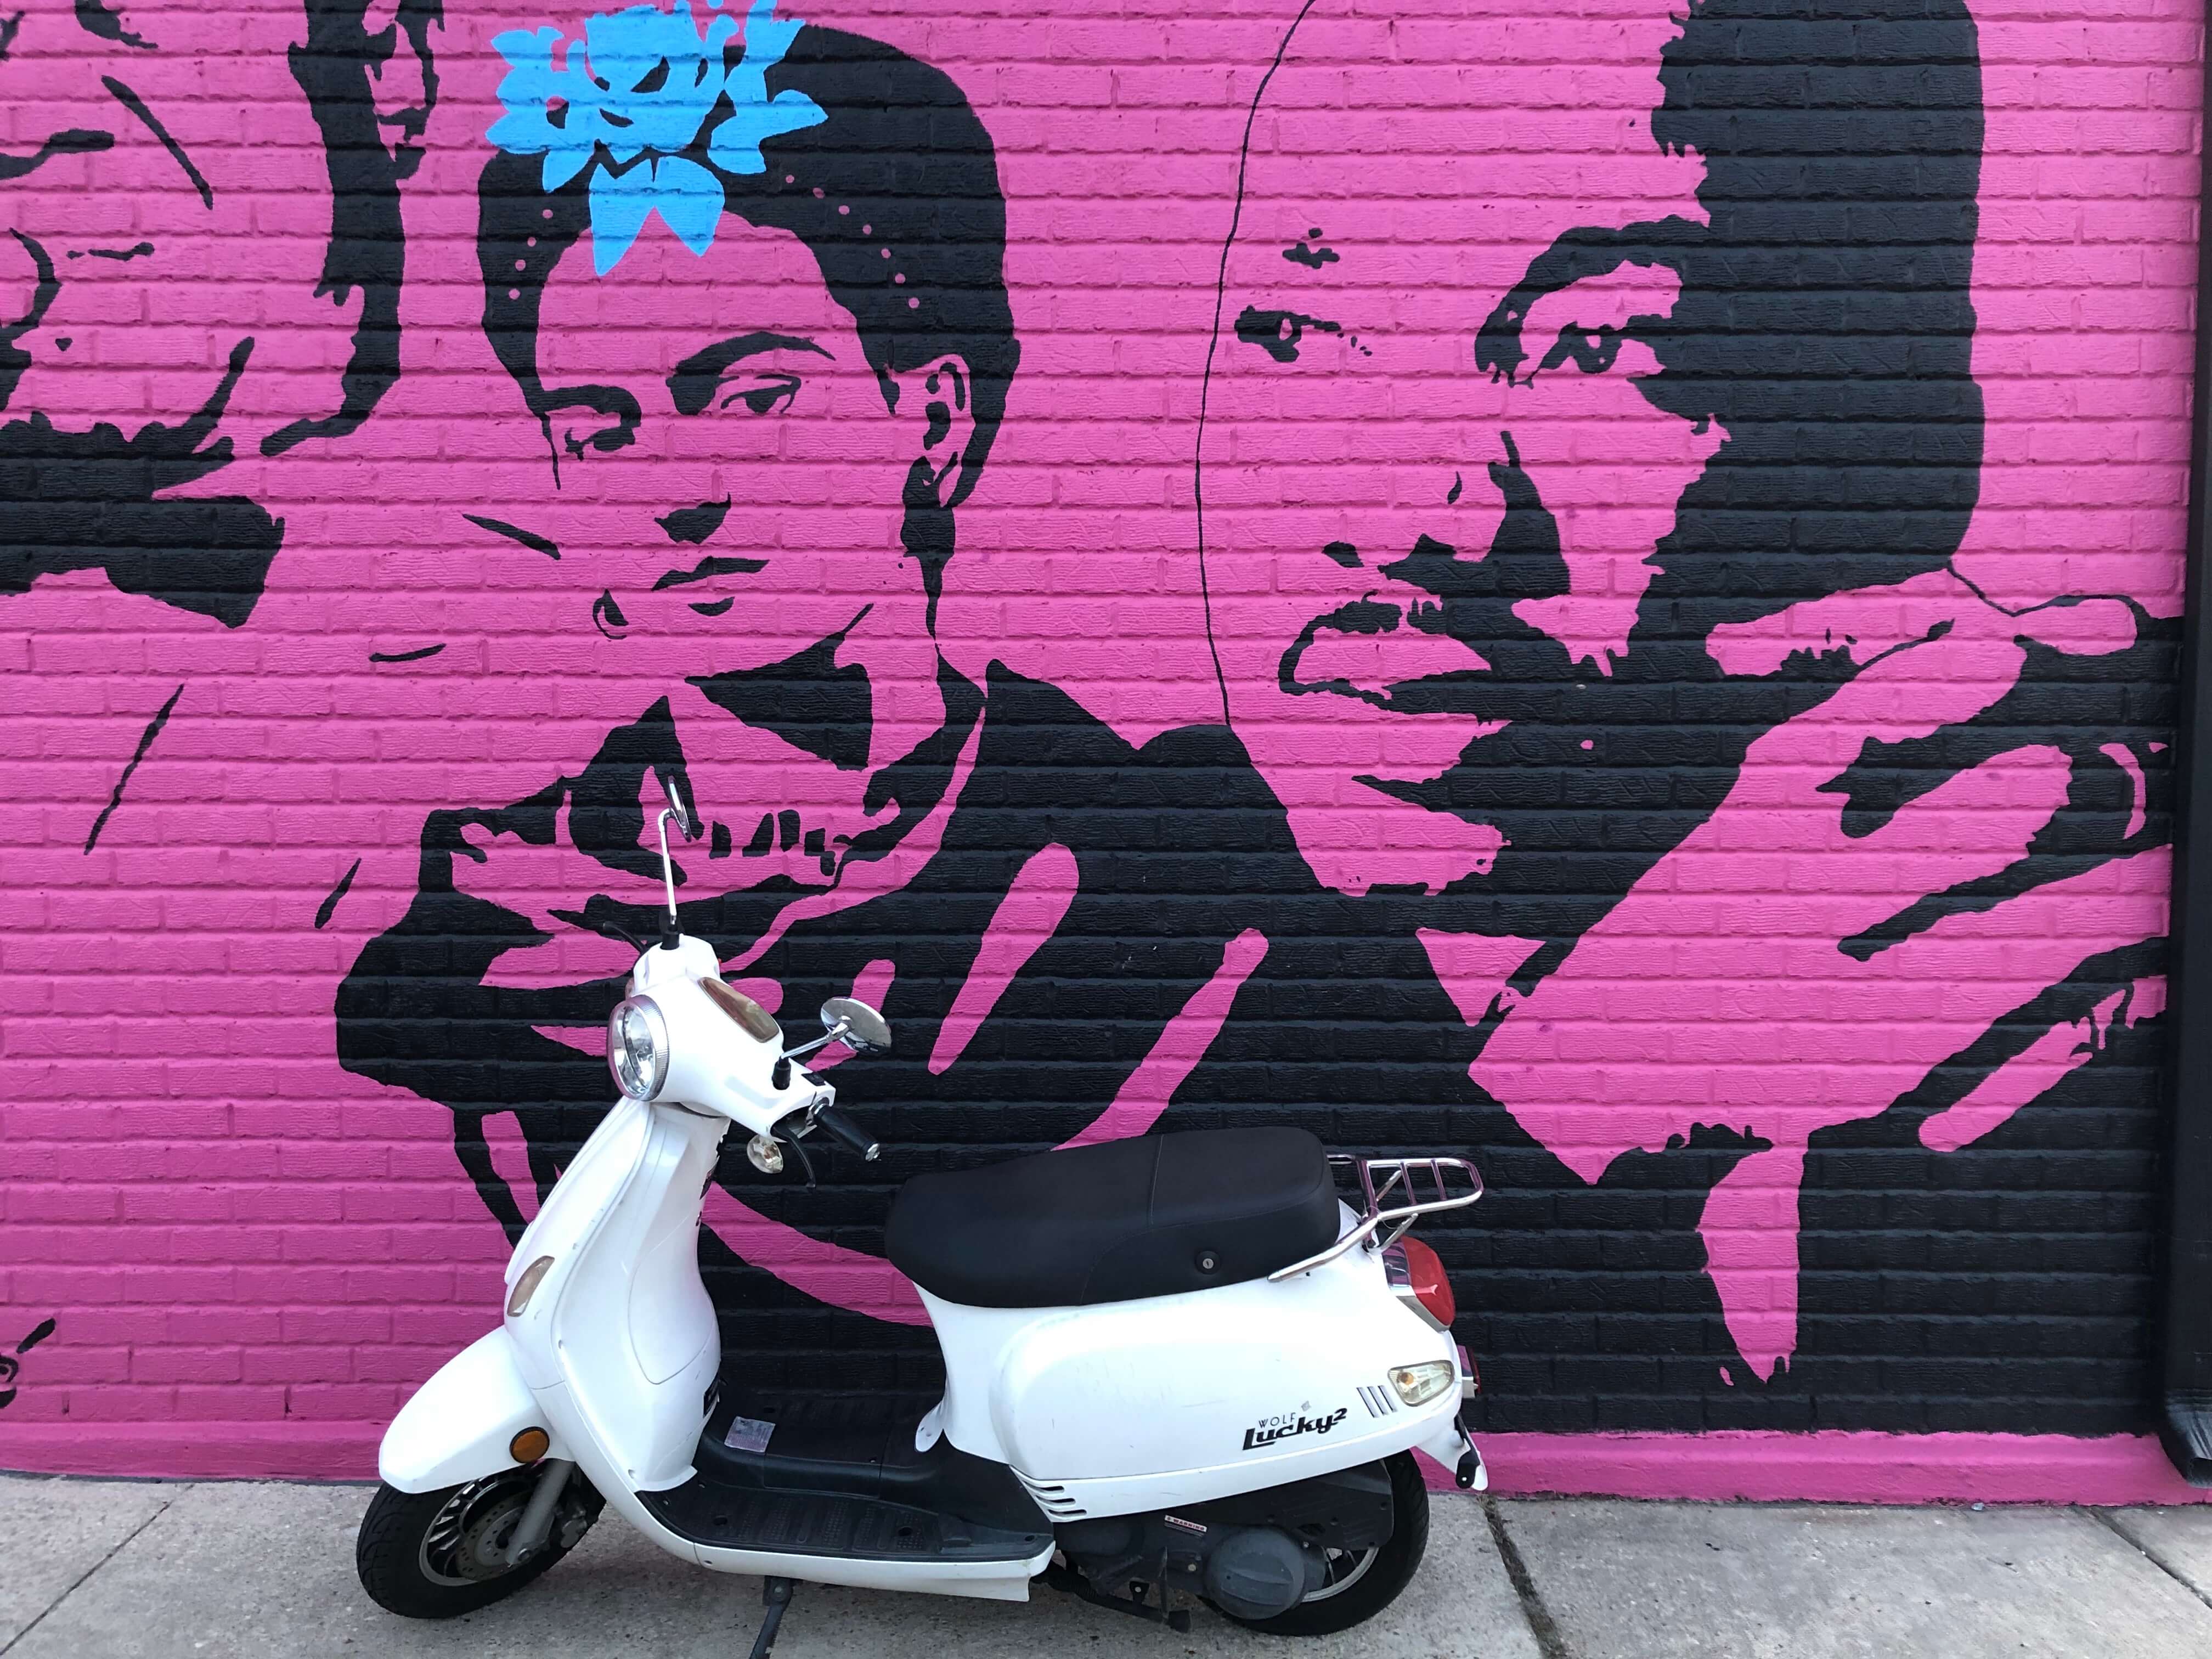 A white motor scooter in front of a pink mural